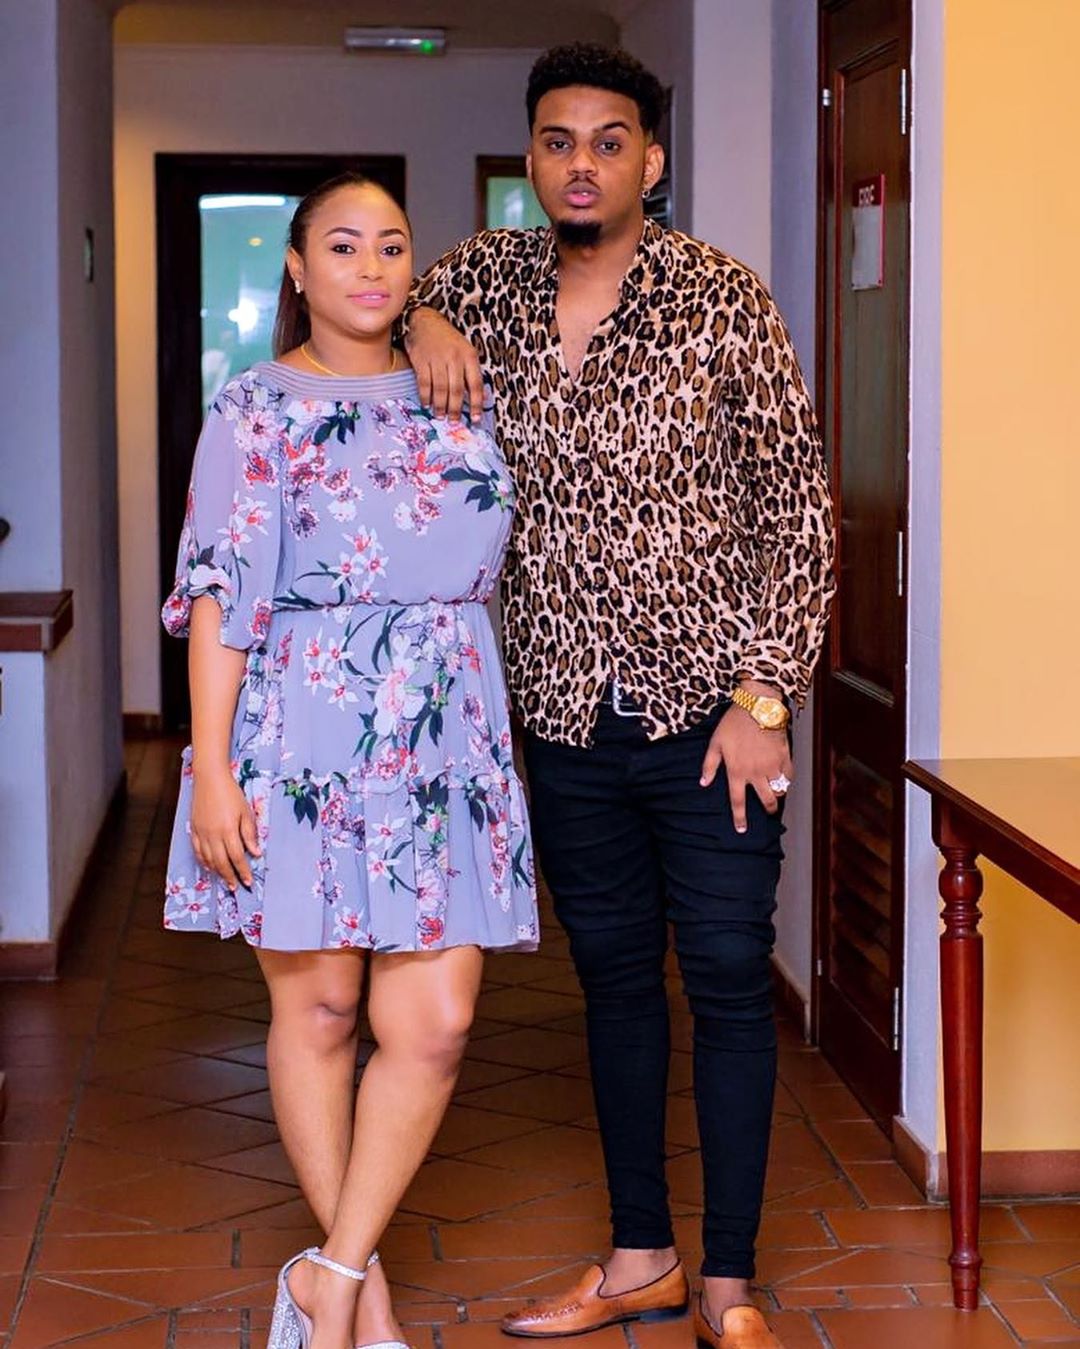 Trouble in paradise for Diamond Platnumz sister and her Ben 10 boyfriend